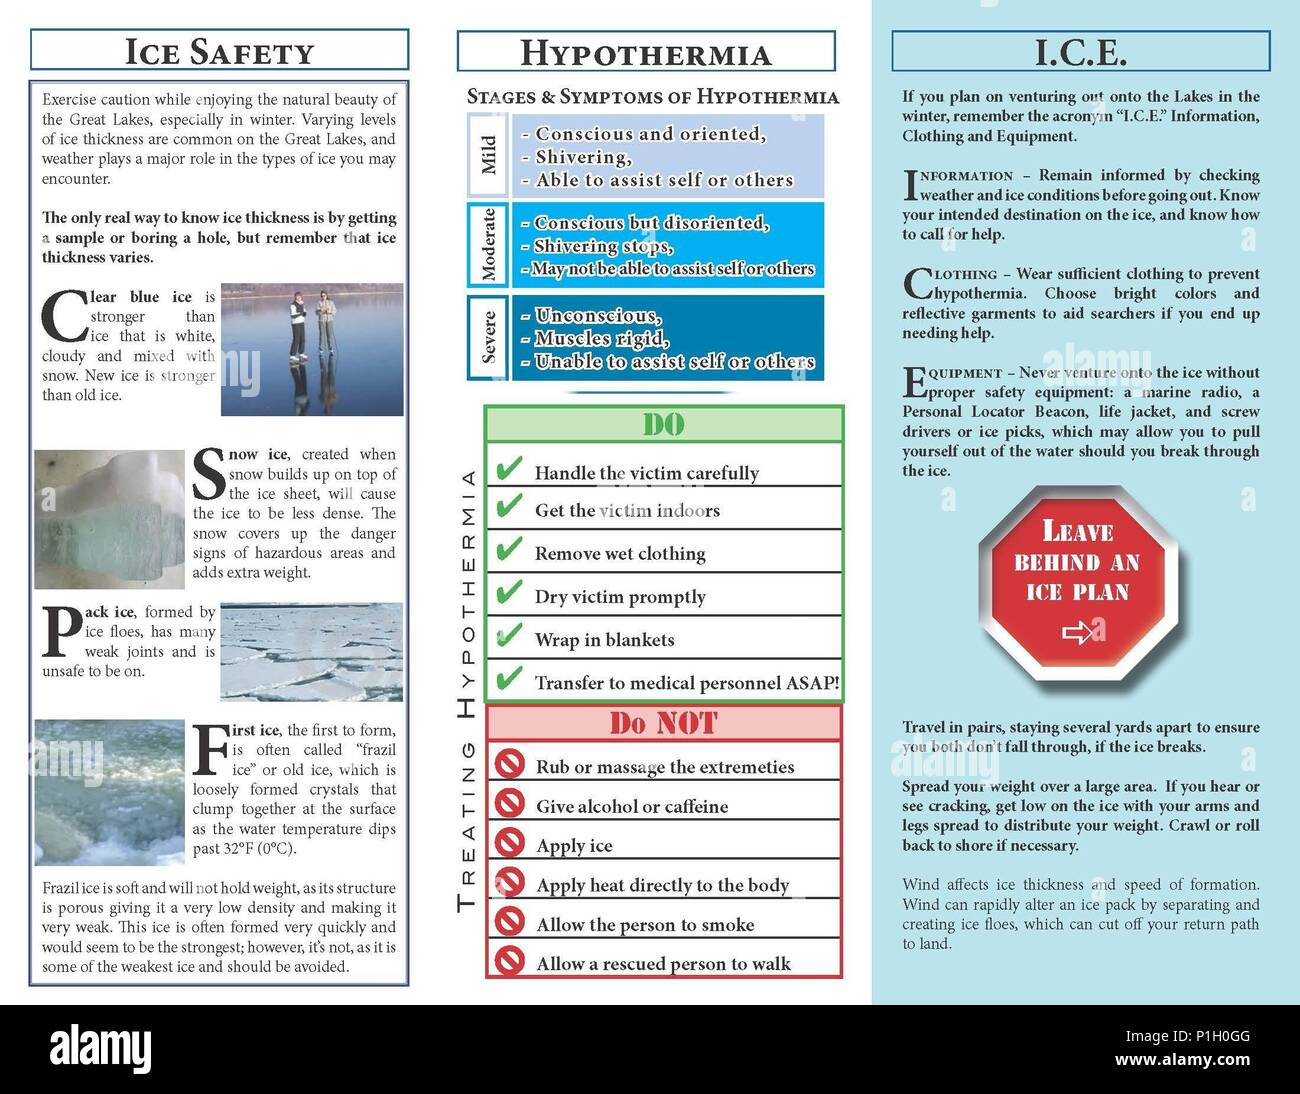 If you plan on venturing out onto the Great Lakes in the winter, remember  the acronym “ICE,” which stands for Information, Clothing and Equipment.  This pamphlet explains what that means and contains